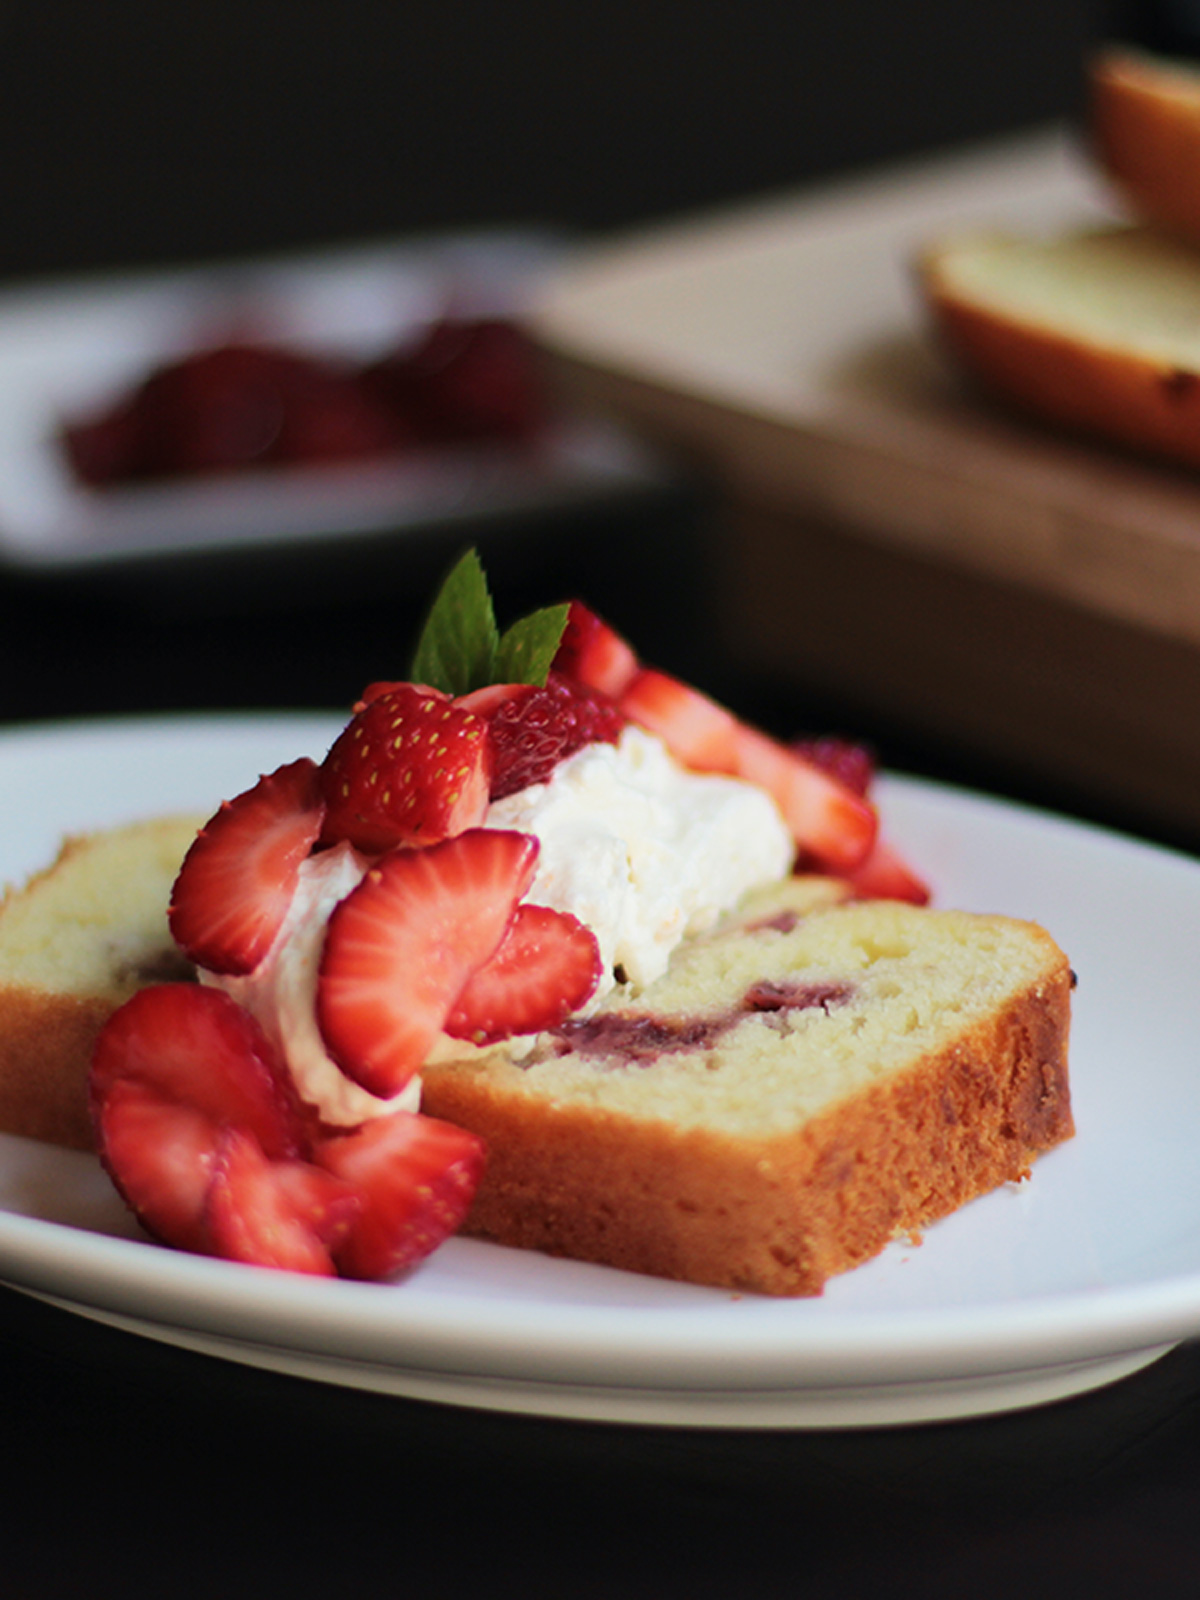 Strawberry shortcake loaf slice on white plate with the whole loaf and extra roasted strawberries in the background.